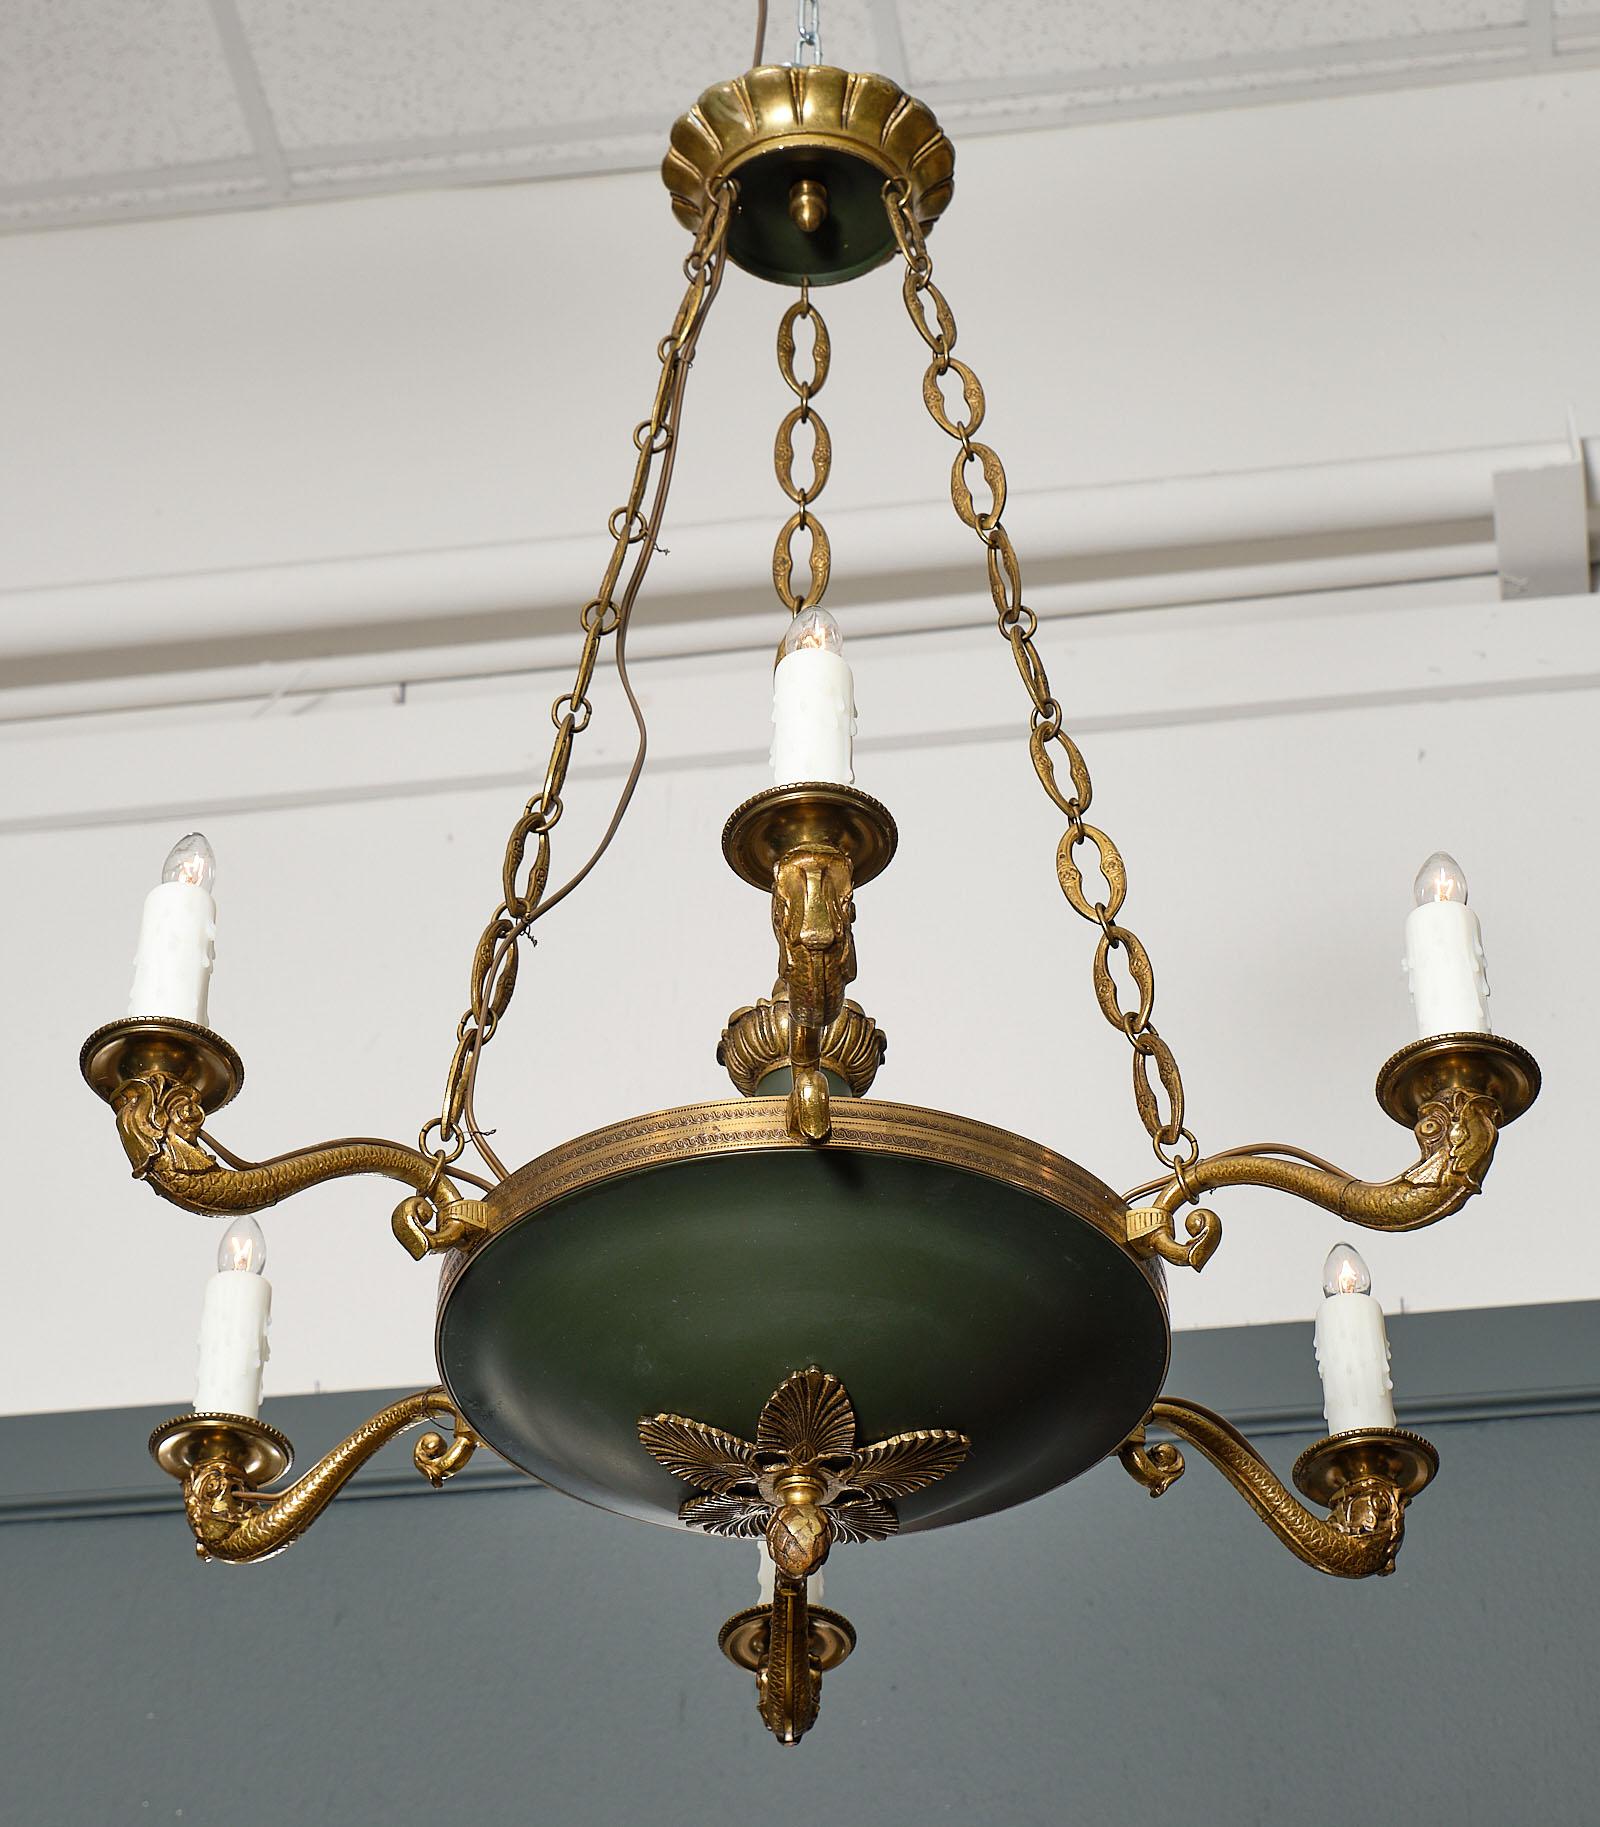 French Empire style bronze chandelier with six candelabra branches and featuring a dark green lacquered body. The arms are beautifully stylized and cast bronze Roman dolphins holding the bobeche. The chains and canopy are all original. This piece